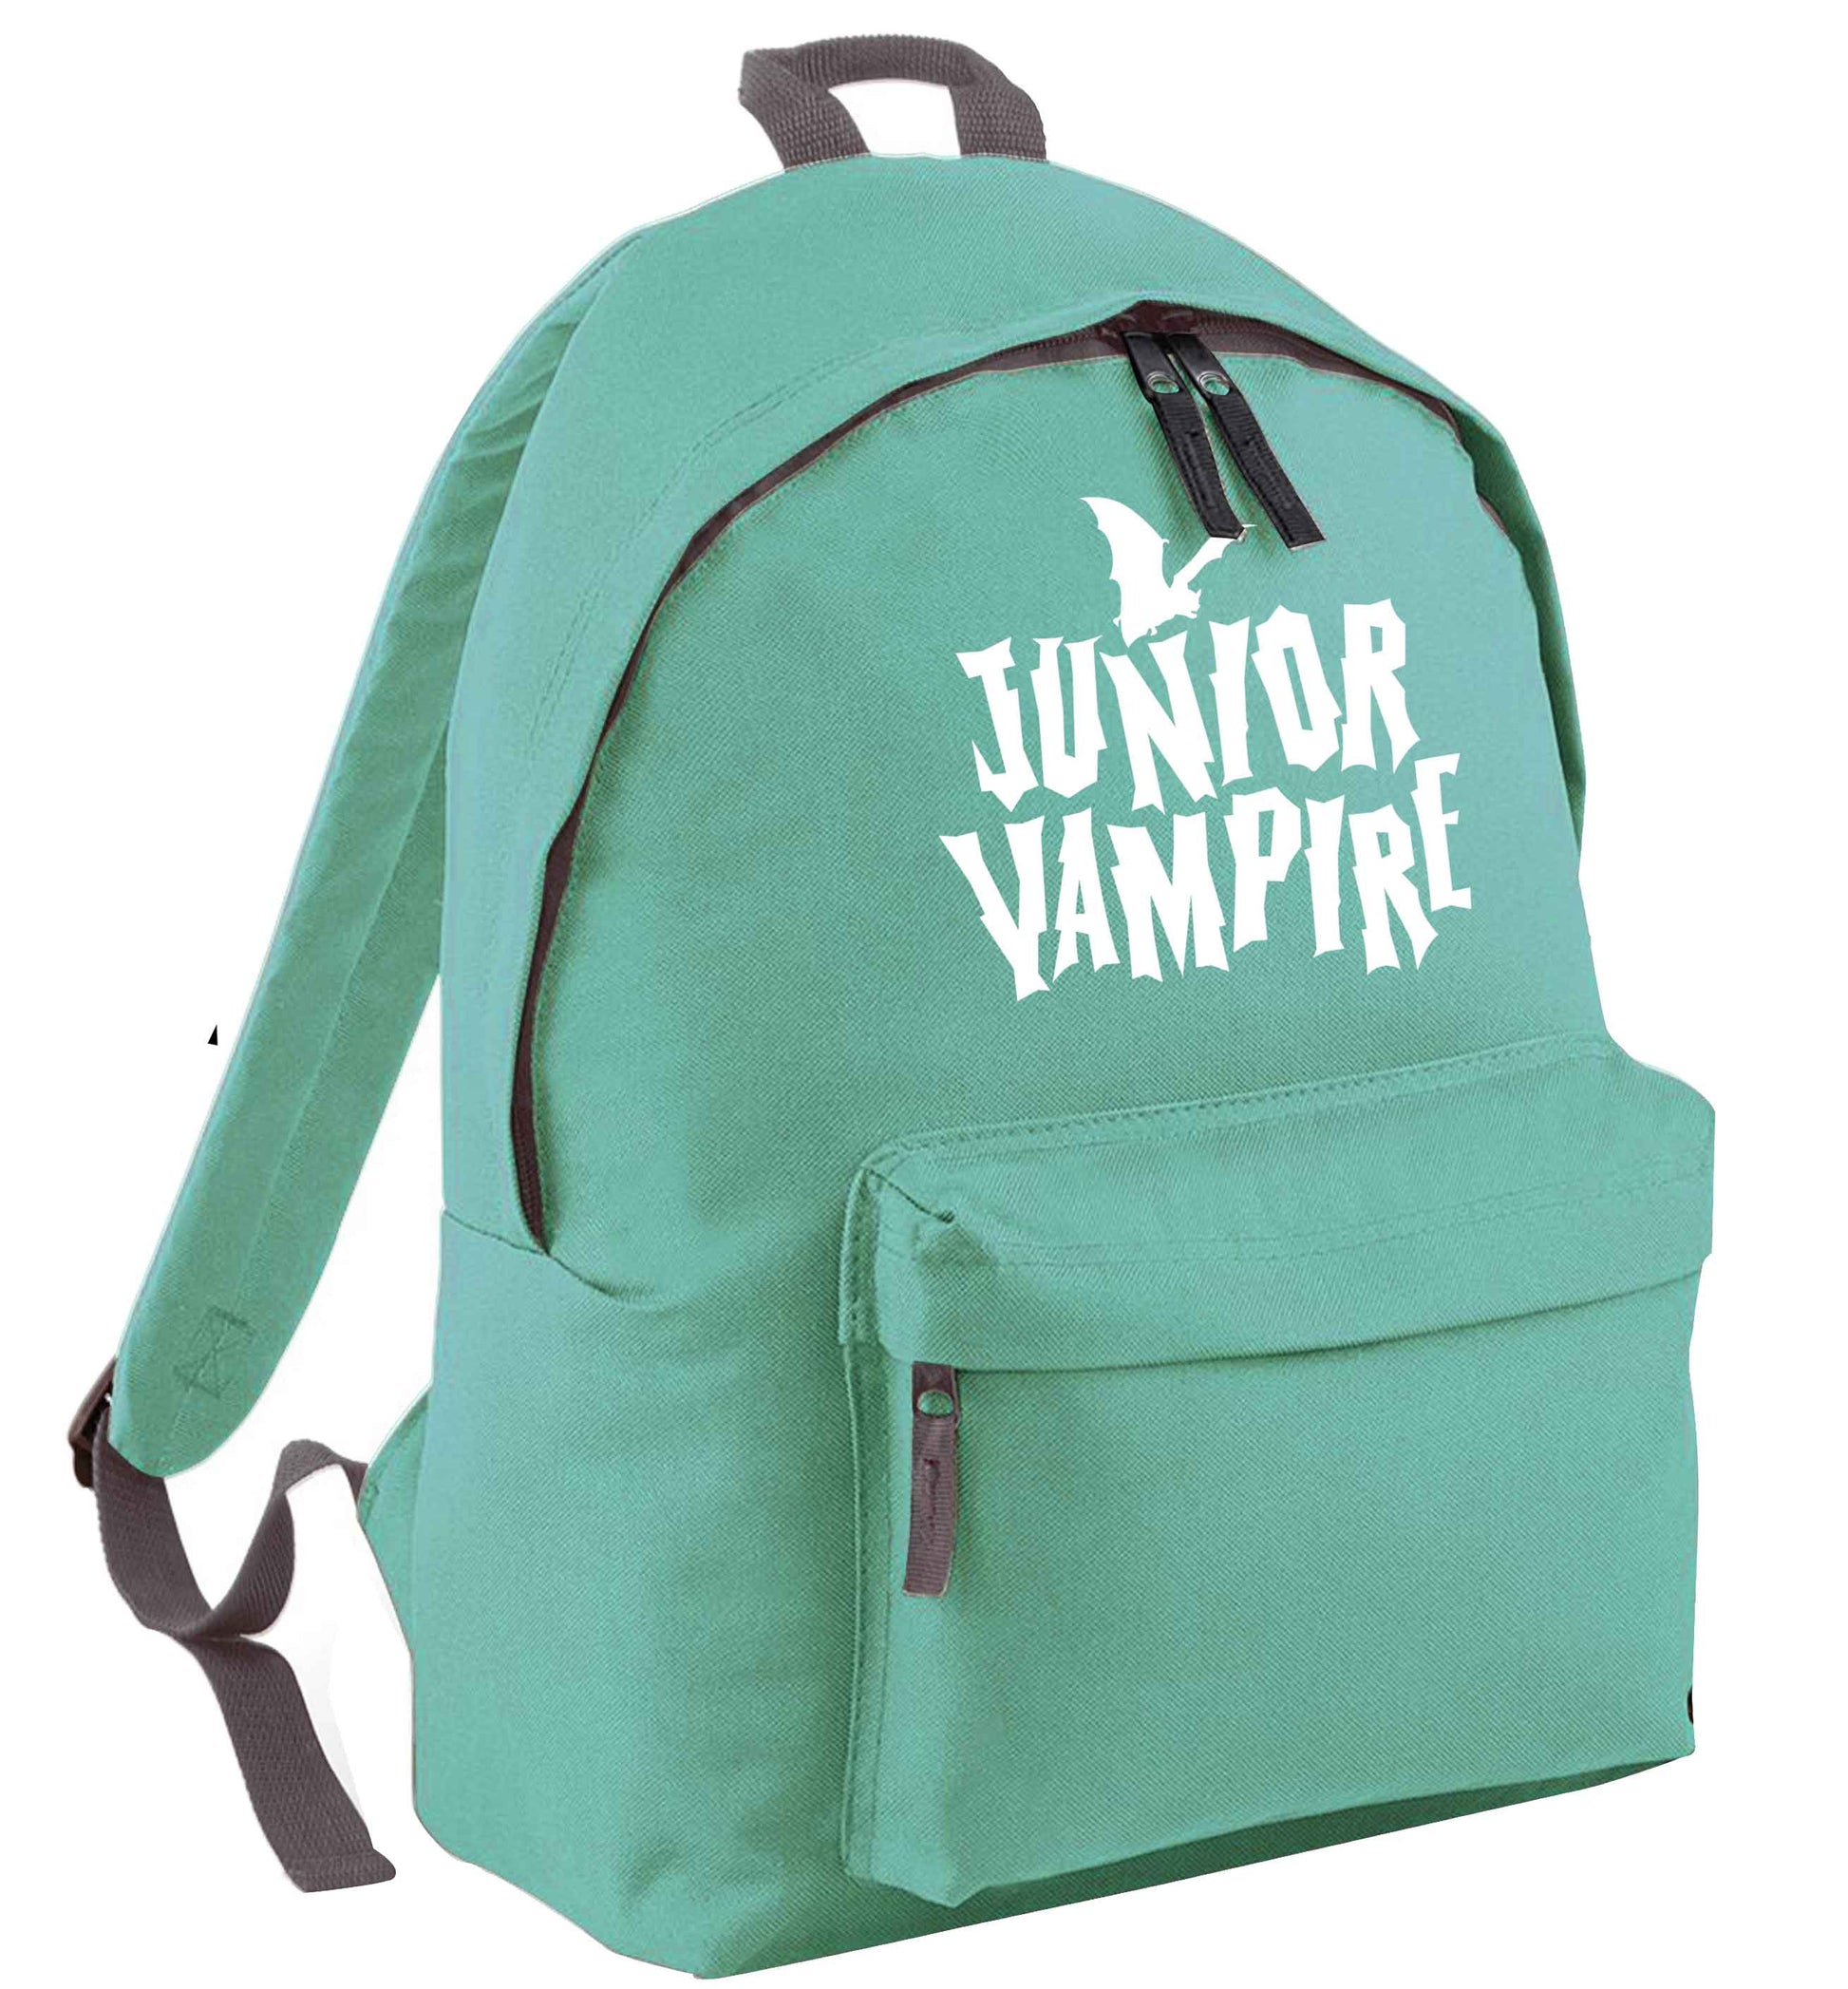 Junior vampire mint adults backpack